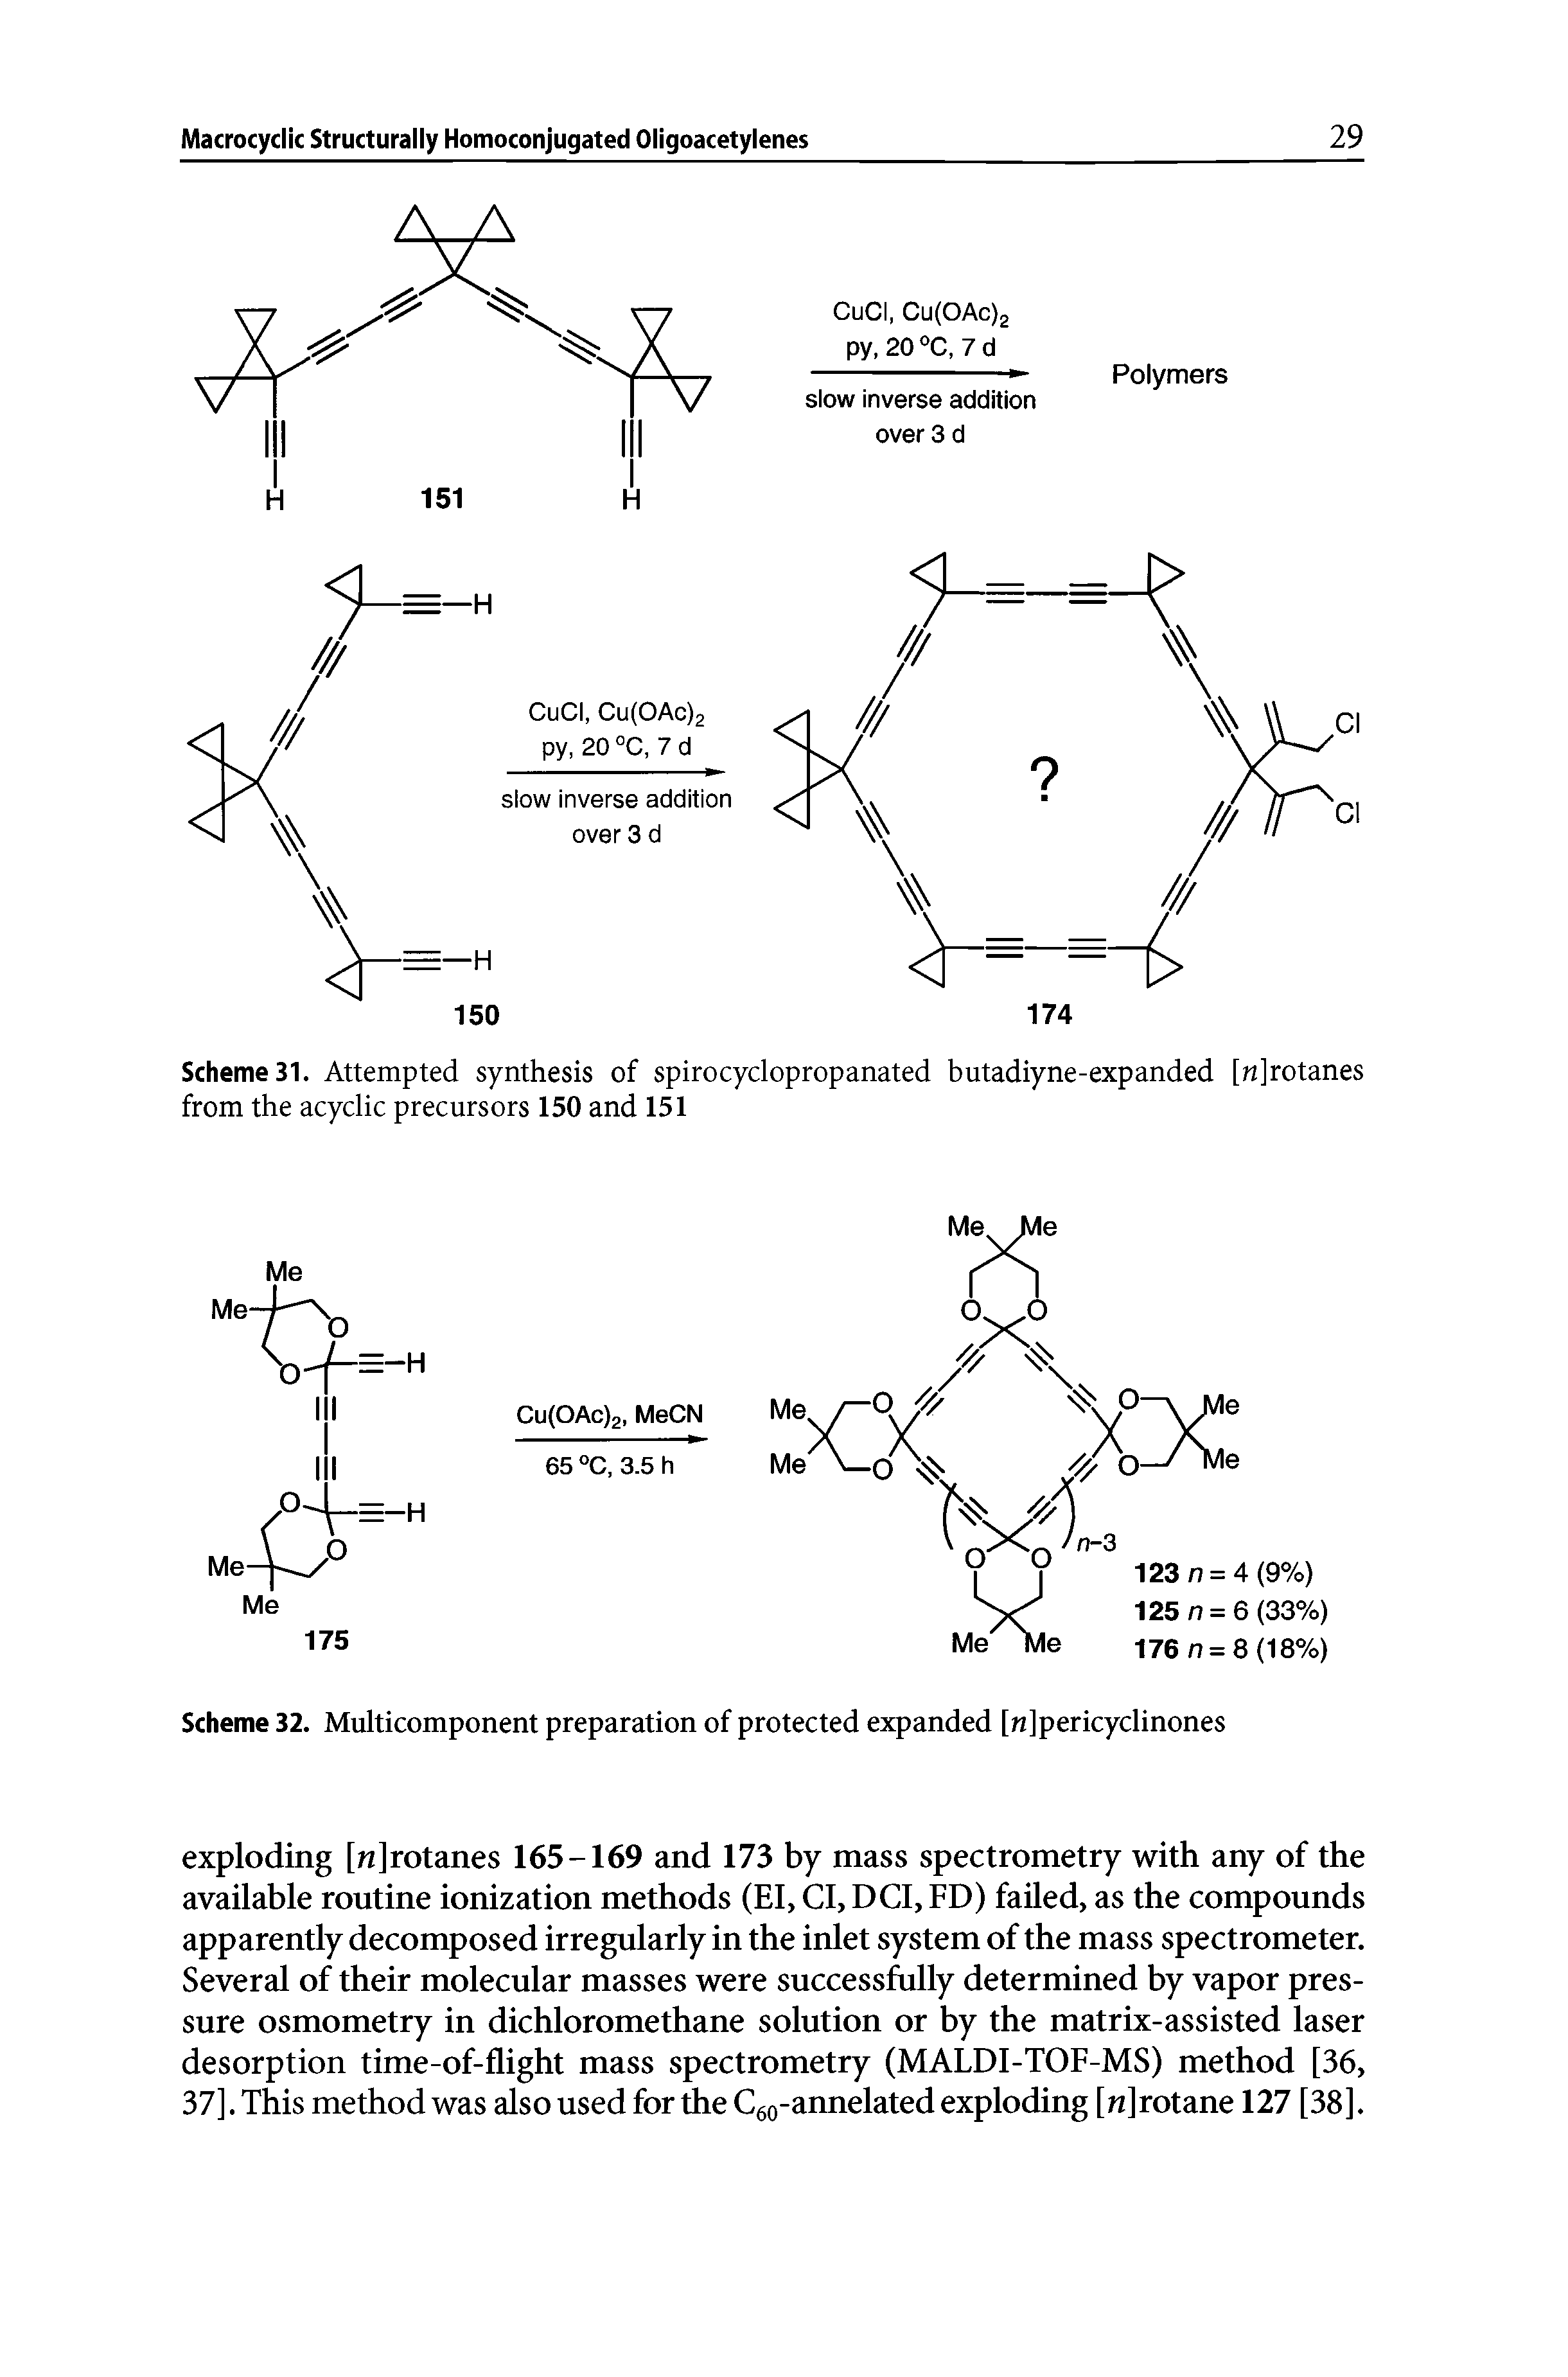 Scheme 31. Attempted synthesis of spirocyclopropanated butadiyne-expanded [n]rotanes from the acyclic precursors 150 and 151...